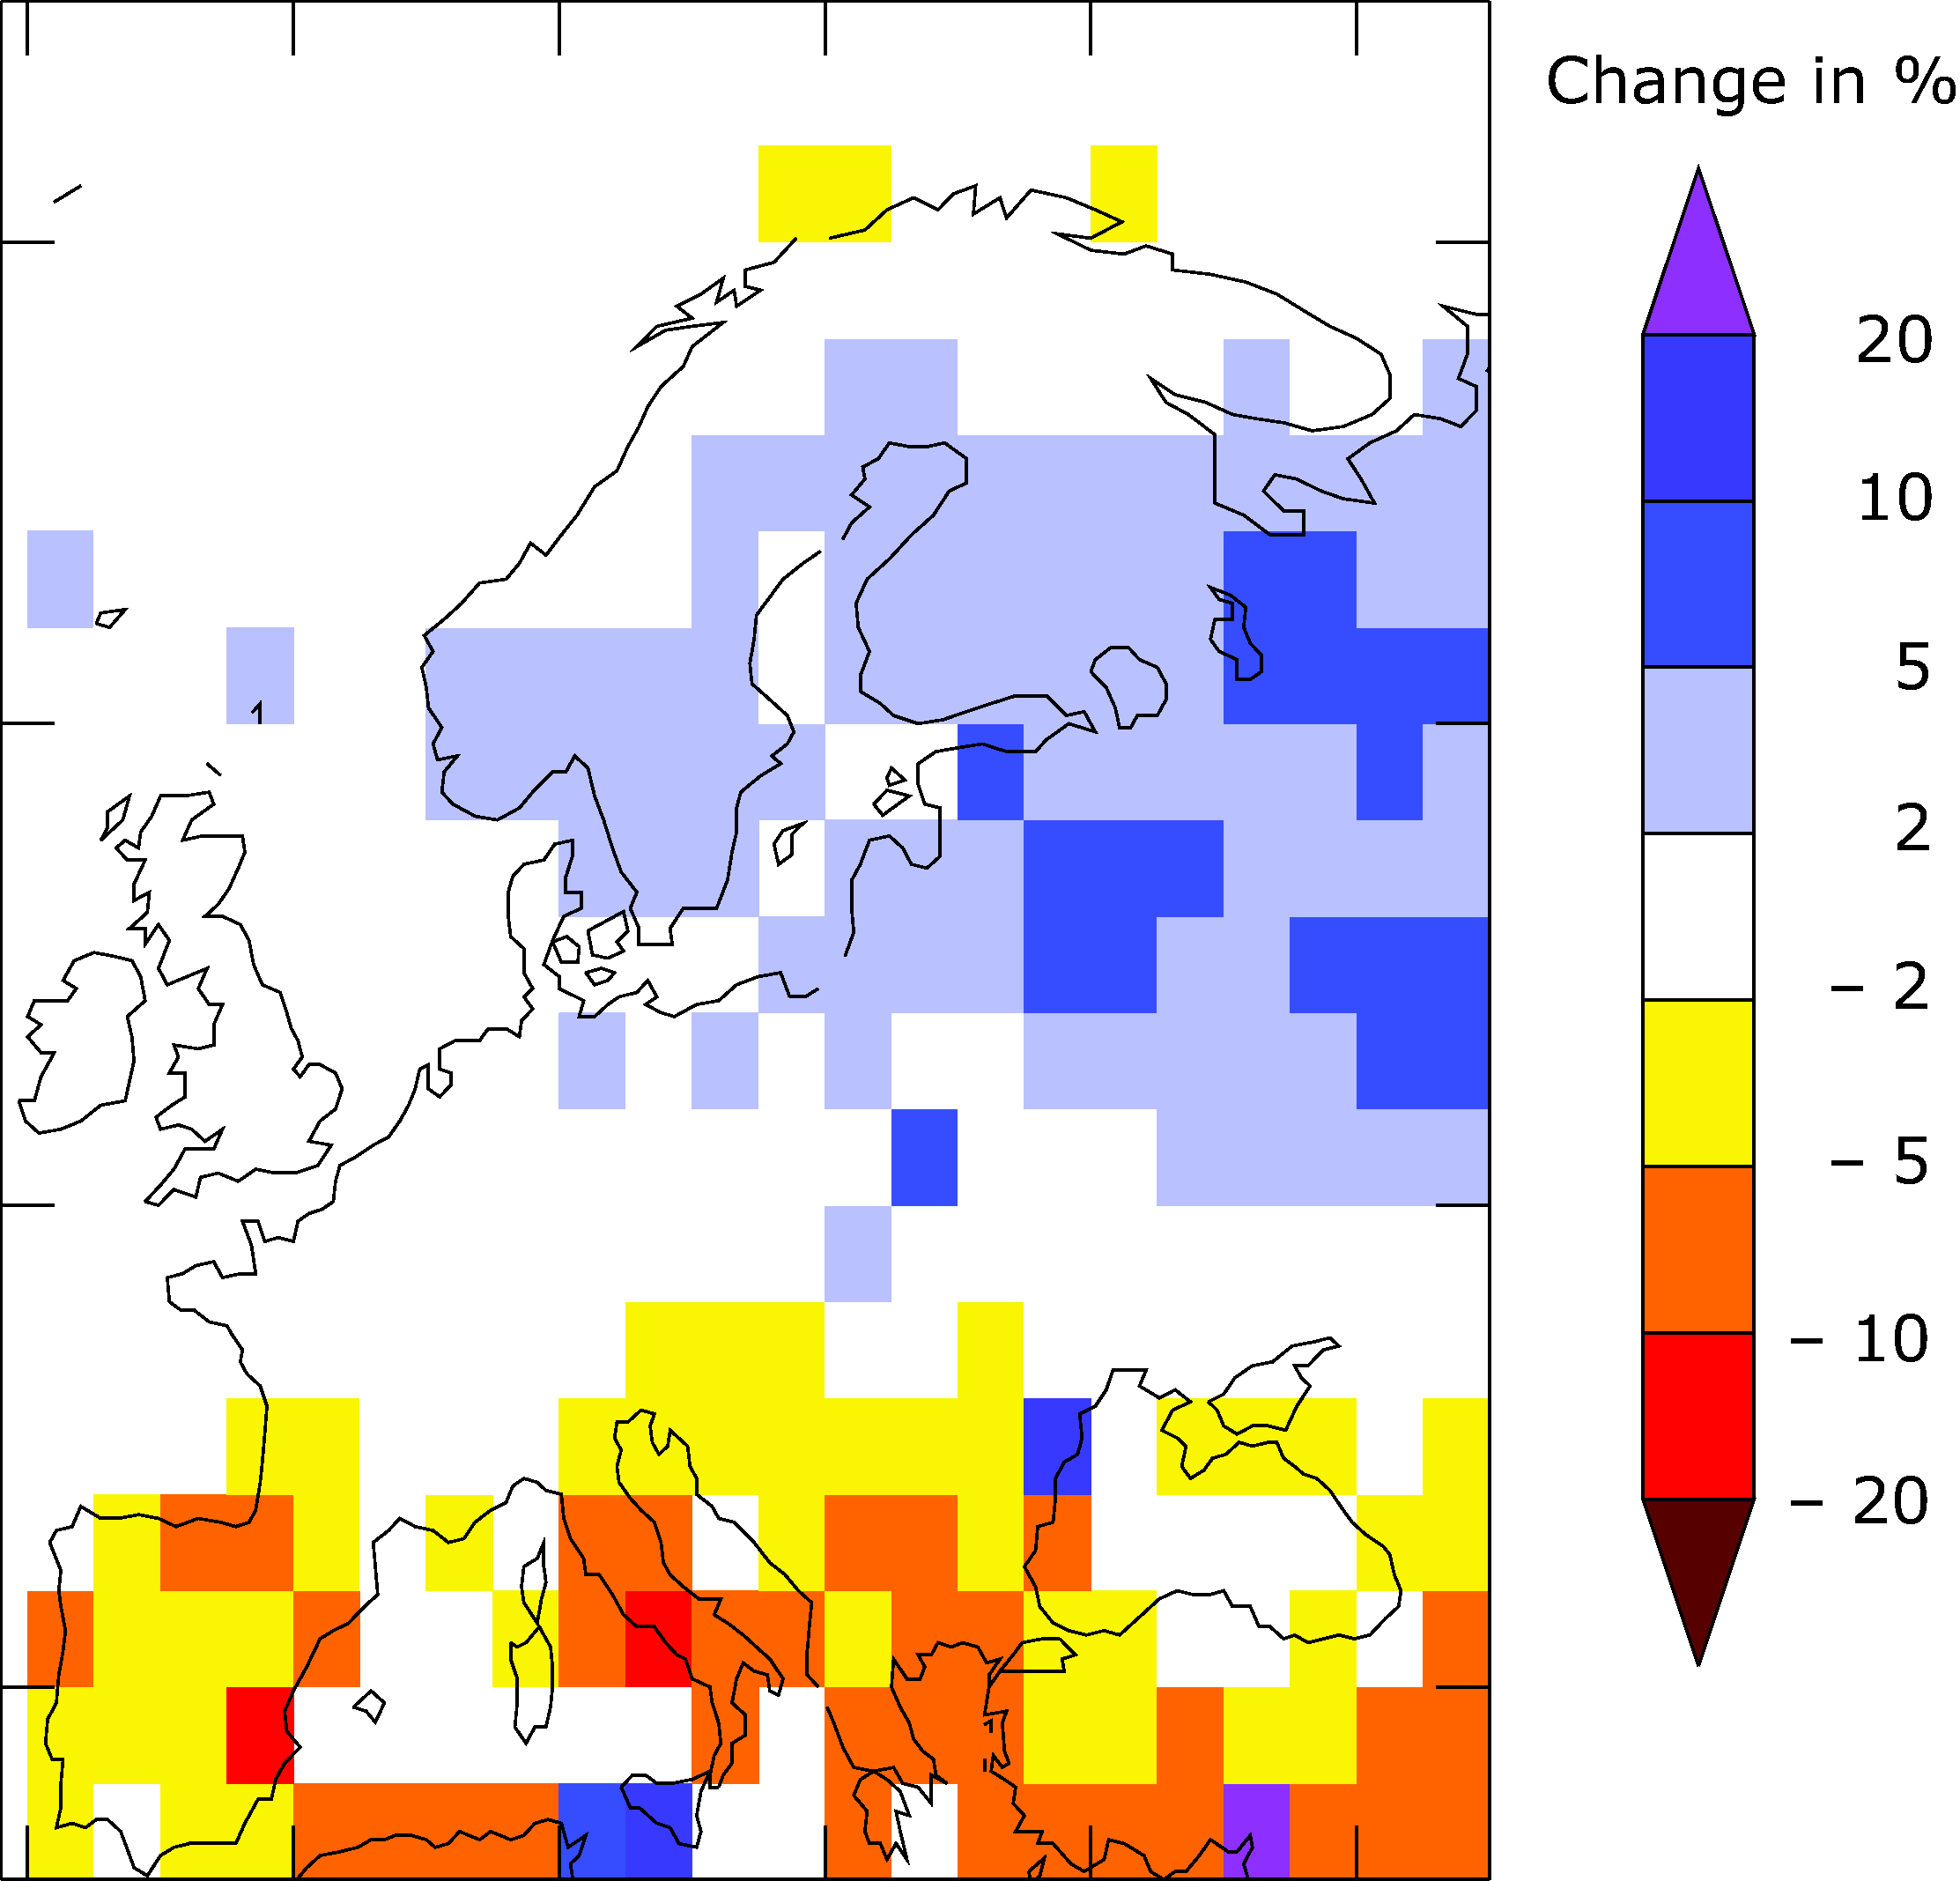 Modelled change in annual river flow between 1971-1998 and 1900-1970